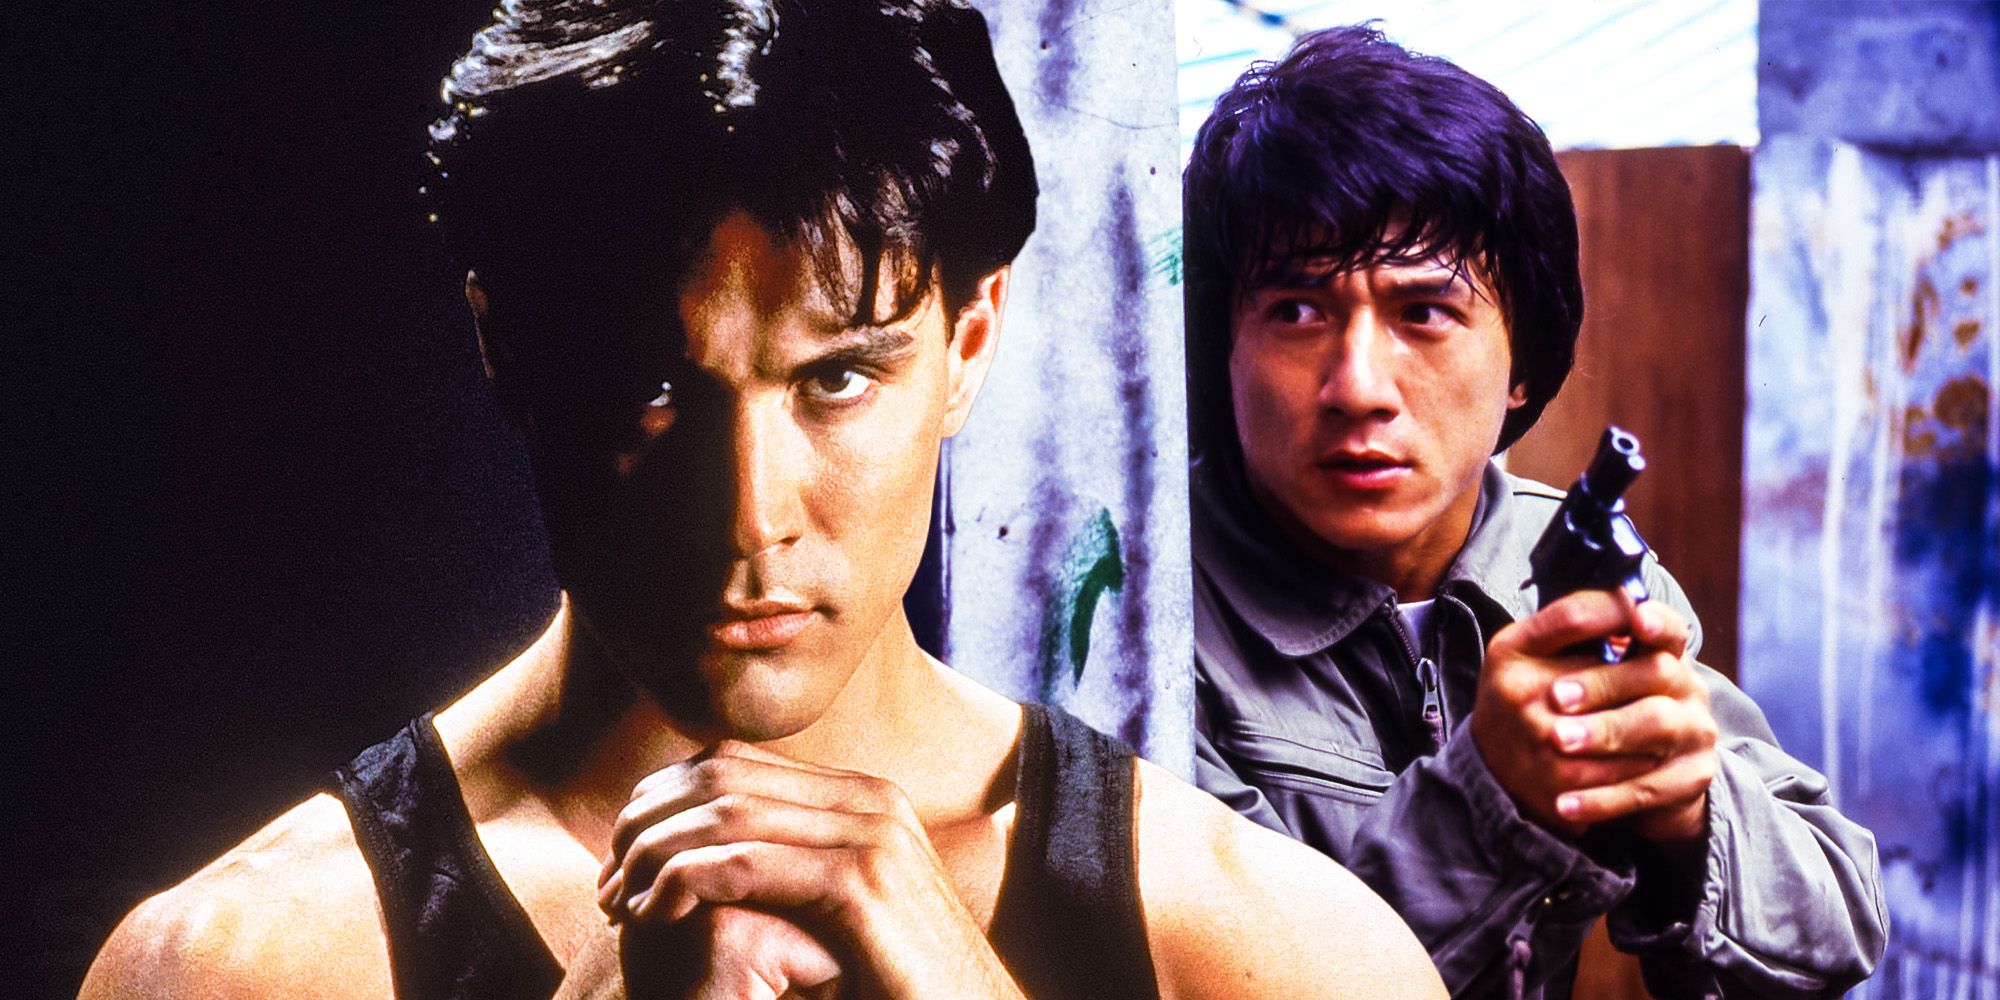 Brandon lee rapid fire paid tribute to jackie chan police story